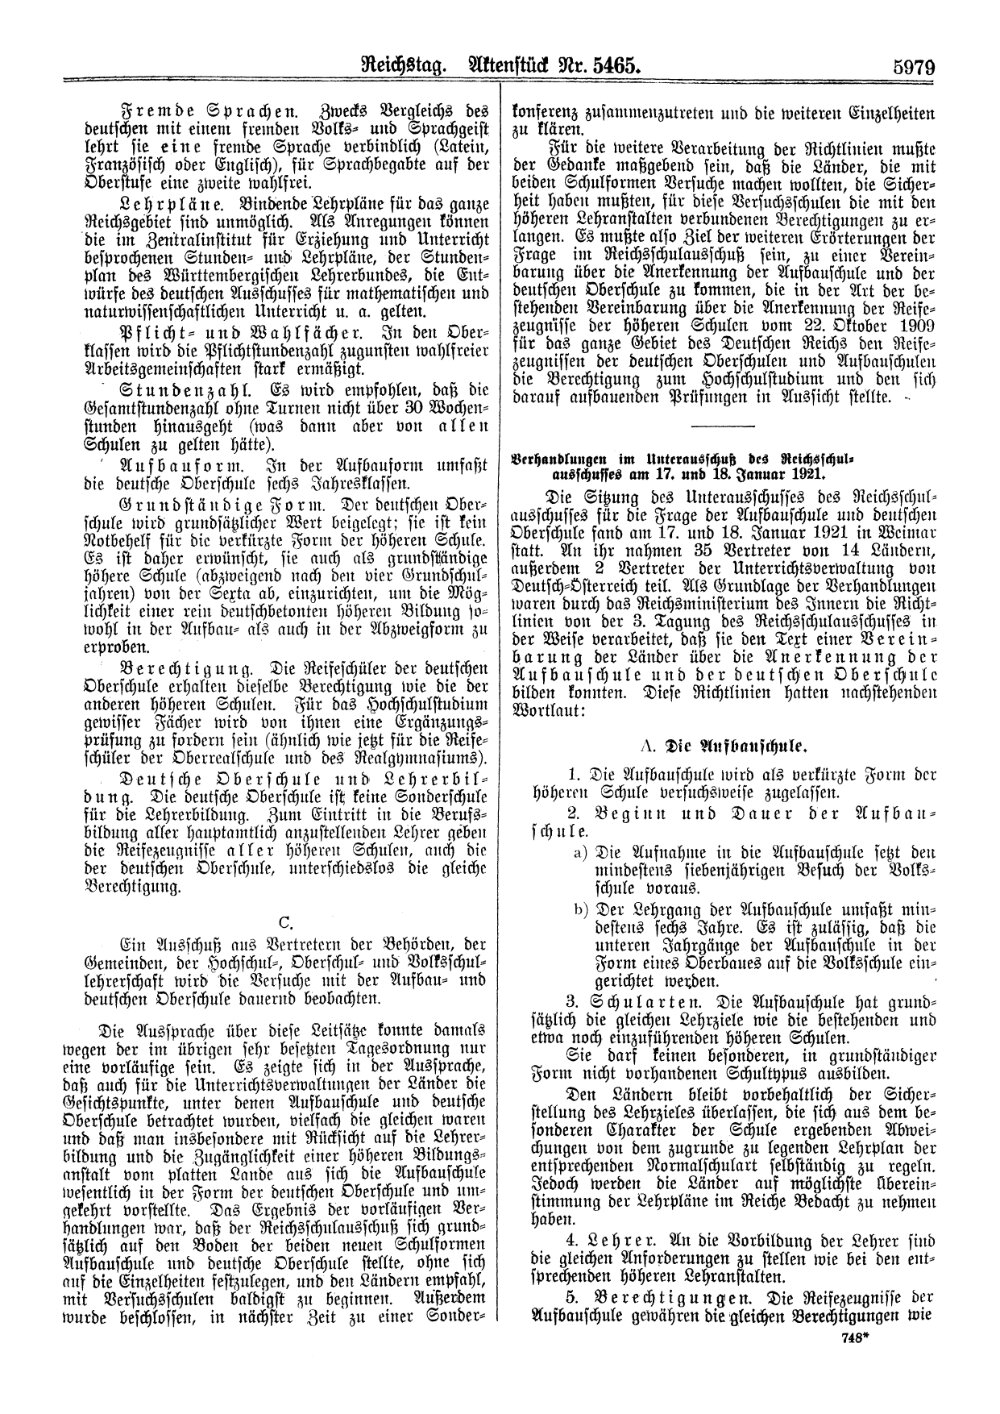 Scan of page 5979